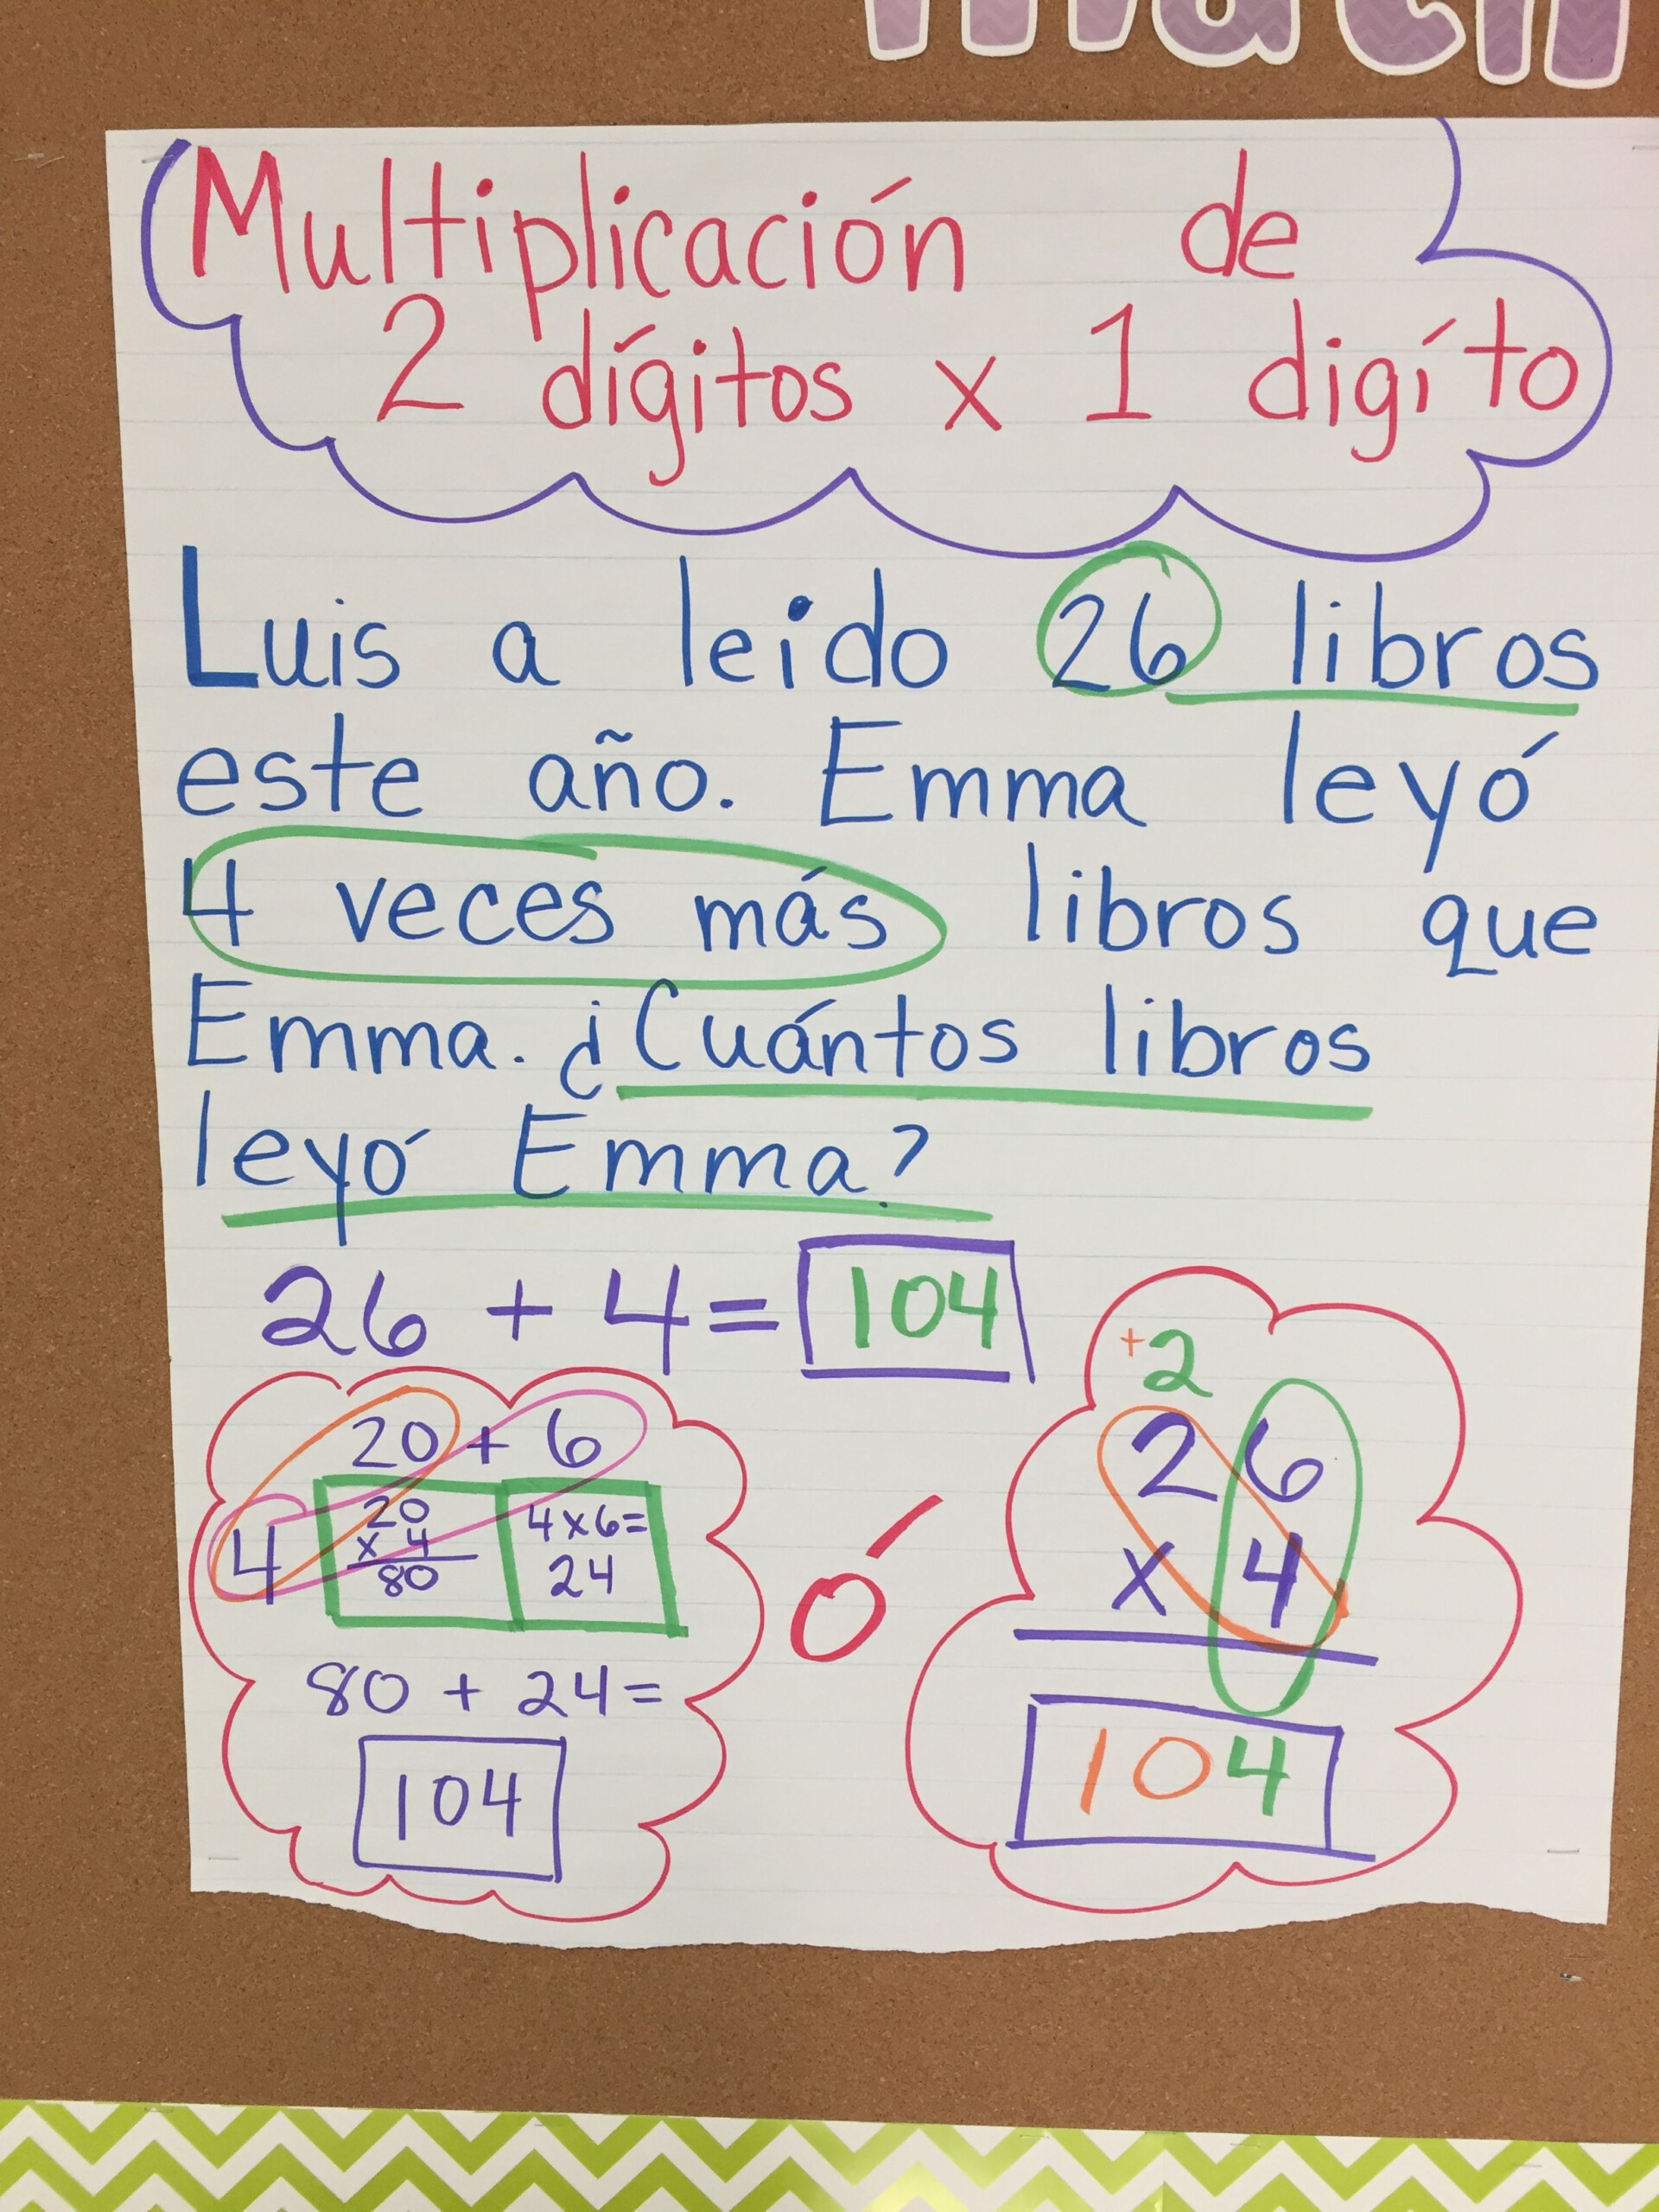 Multiplication Chart In Spanish Printable Multiplication Flash Cards